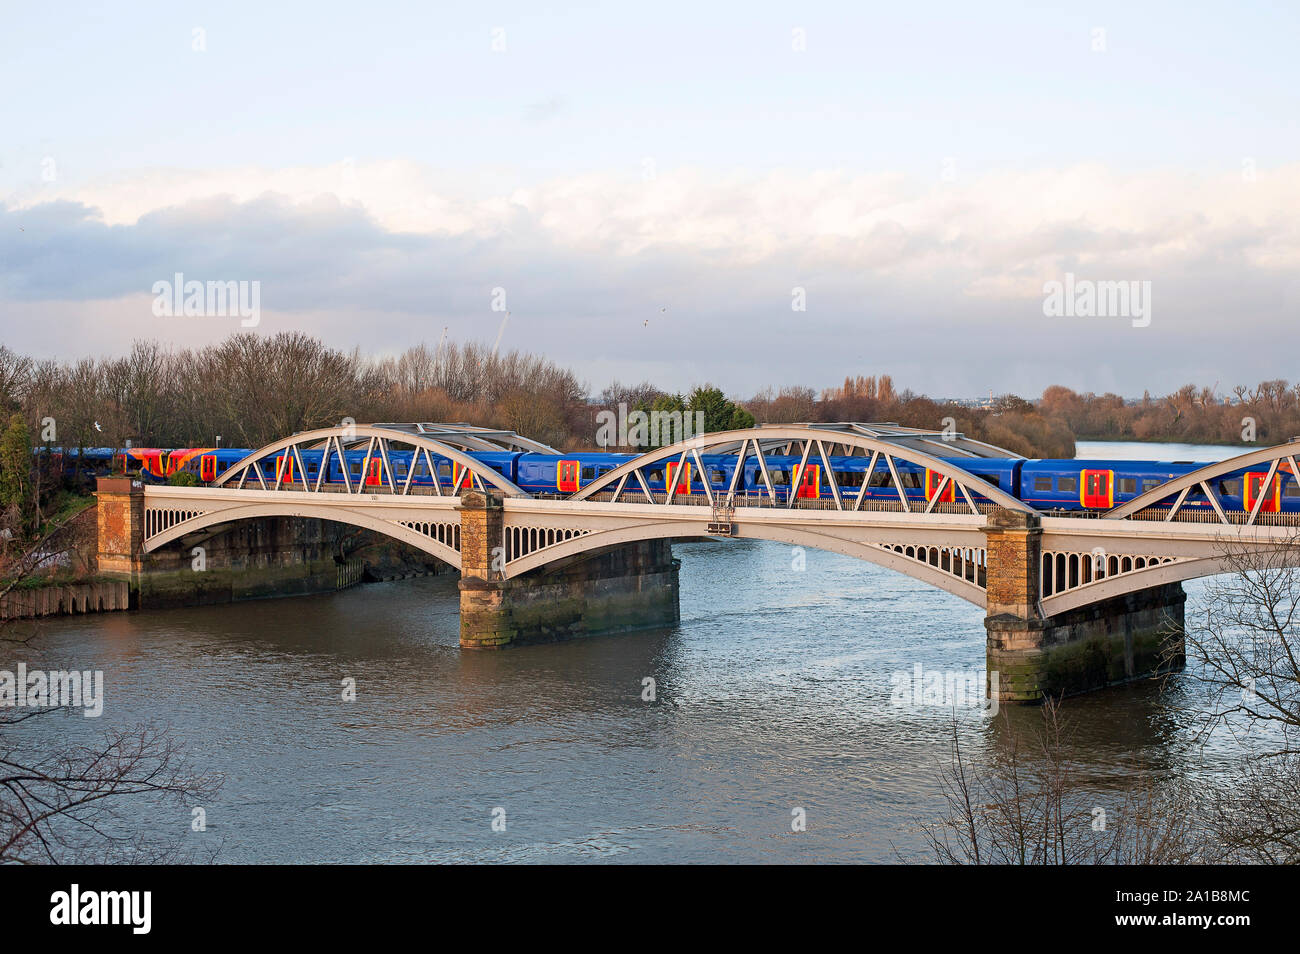 Elevated view of west side of Barnes Railway  Bridge, London SW13 over the River Thames with train crossing. Stock Photo